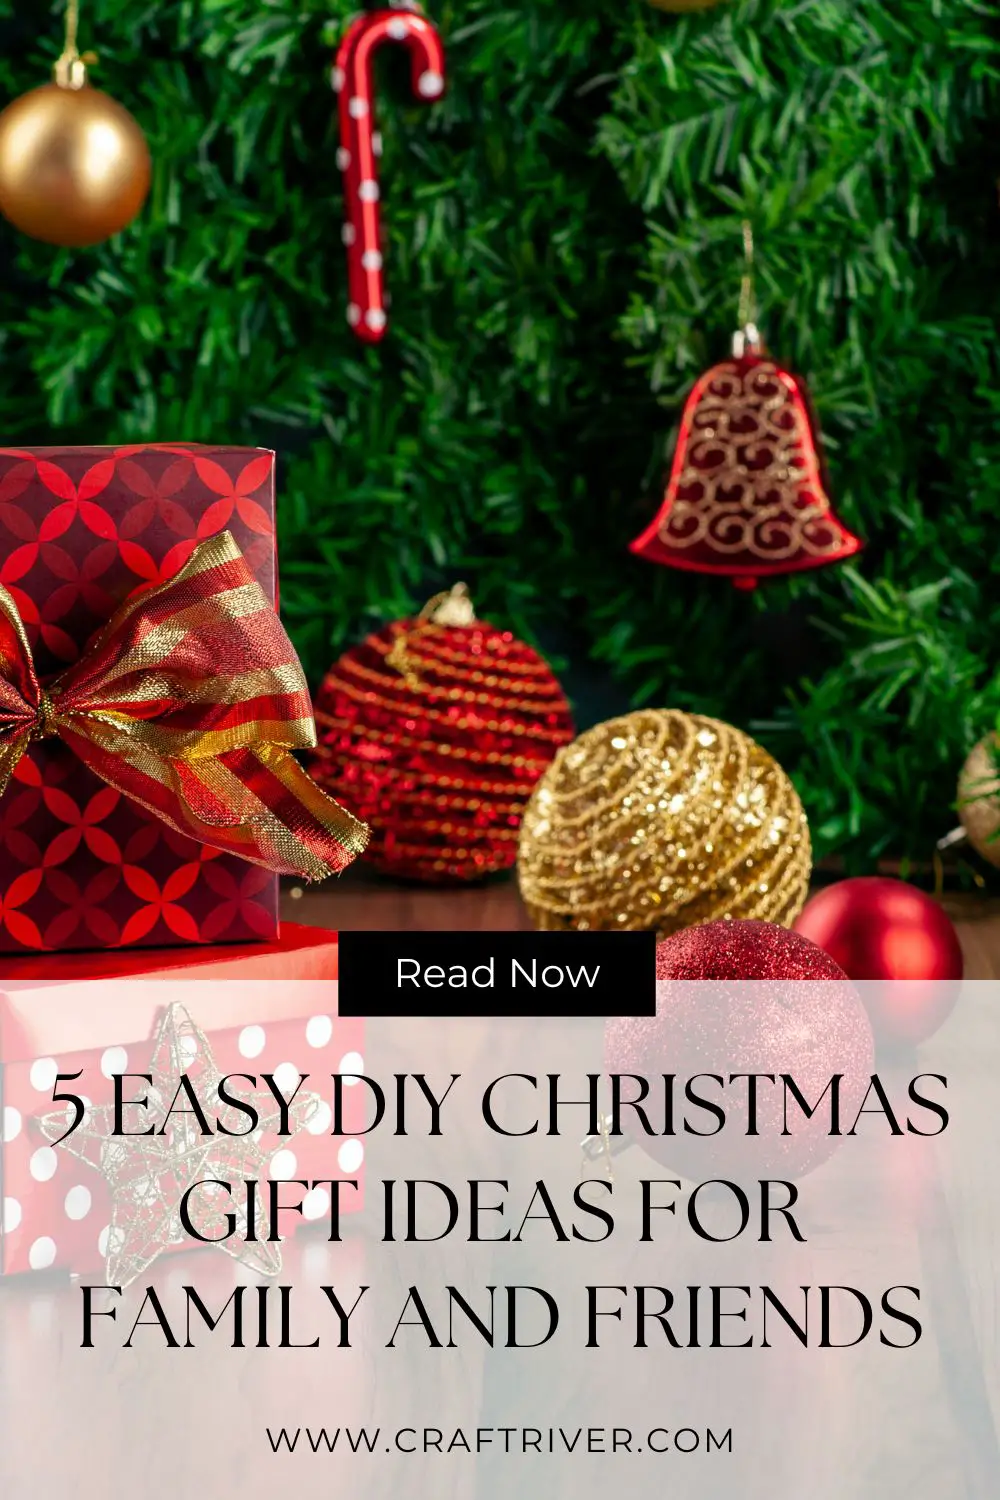 5 Easy DIY Christmas Gift Ideas For Family And Friends